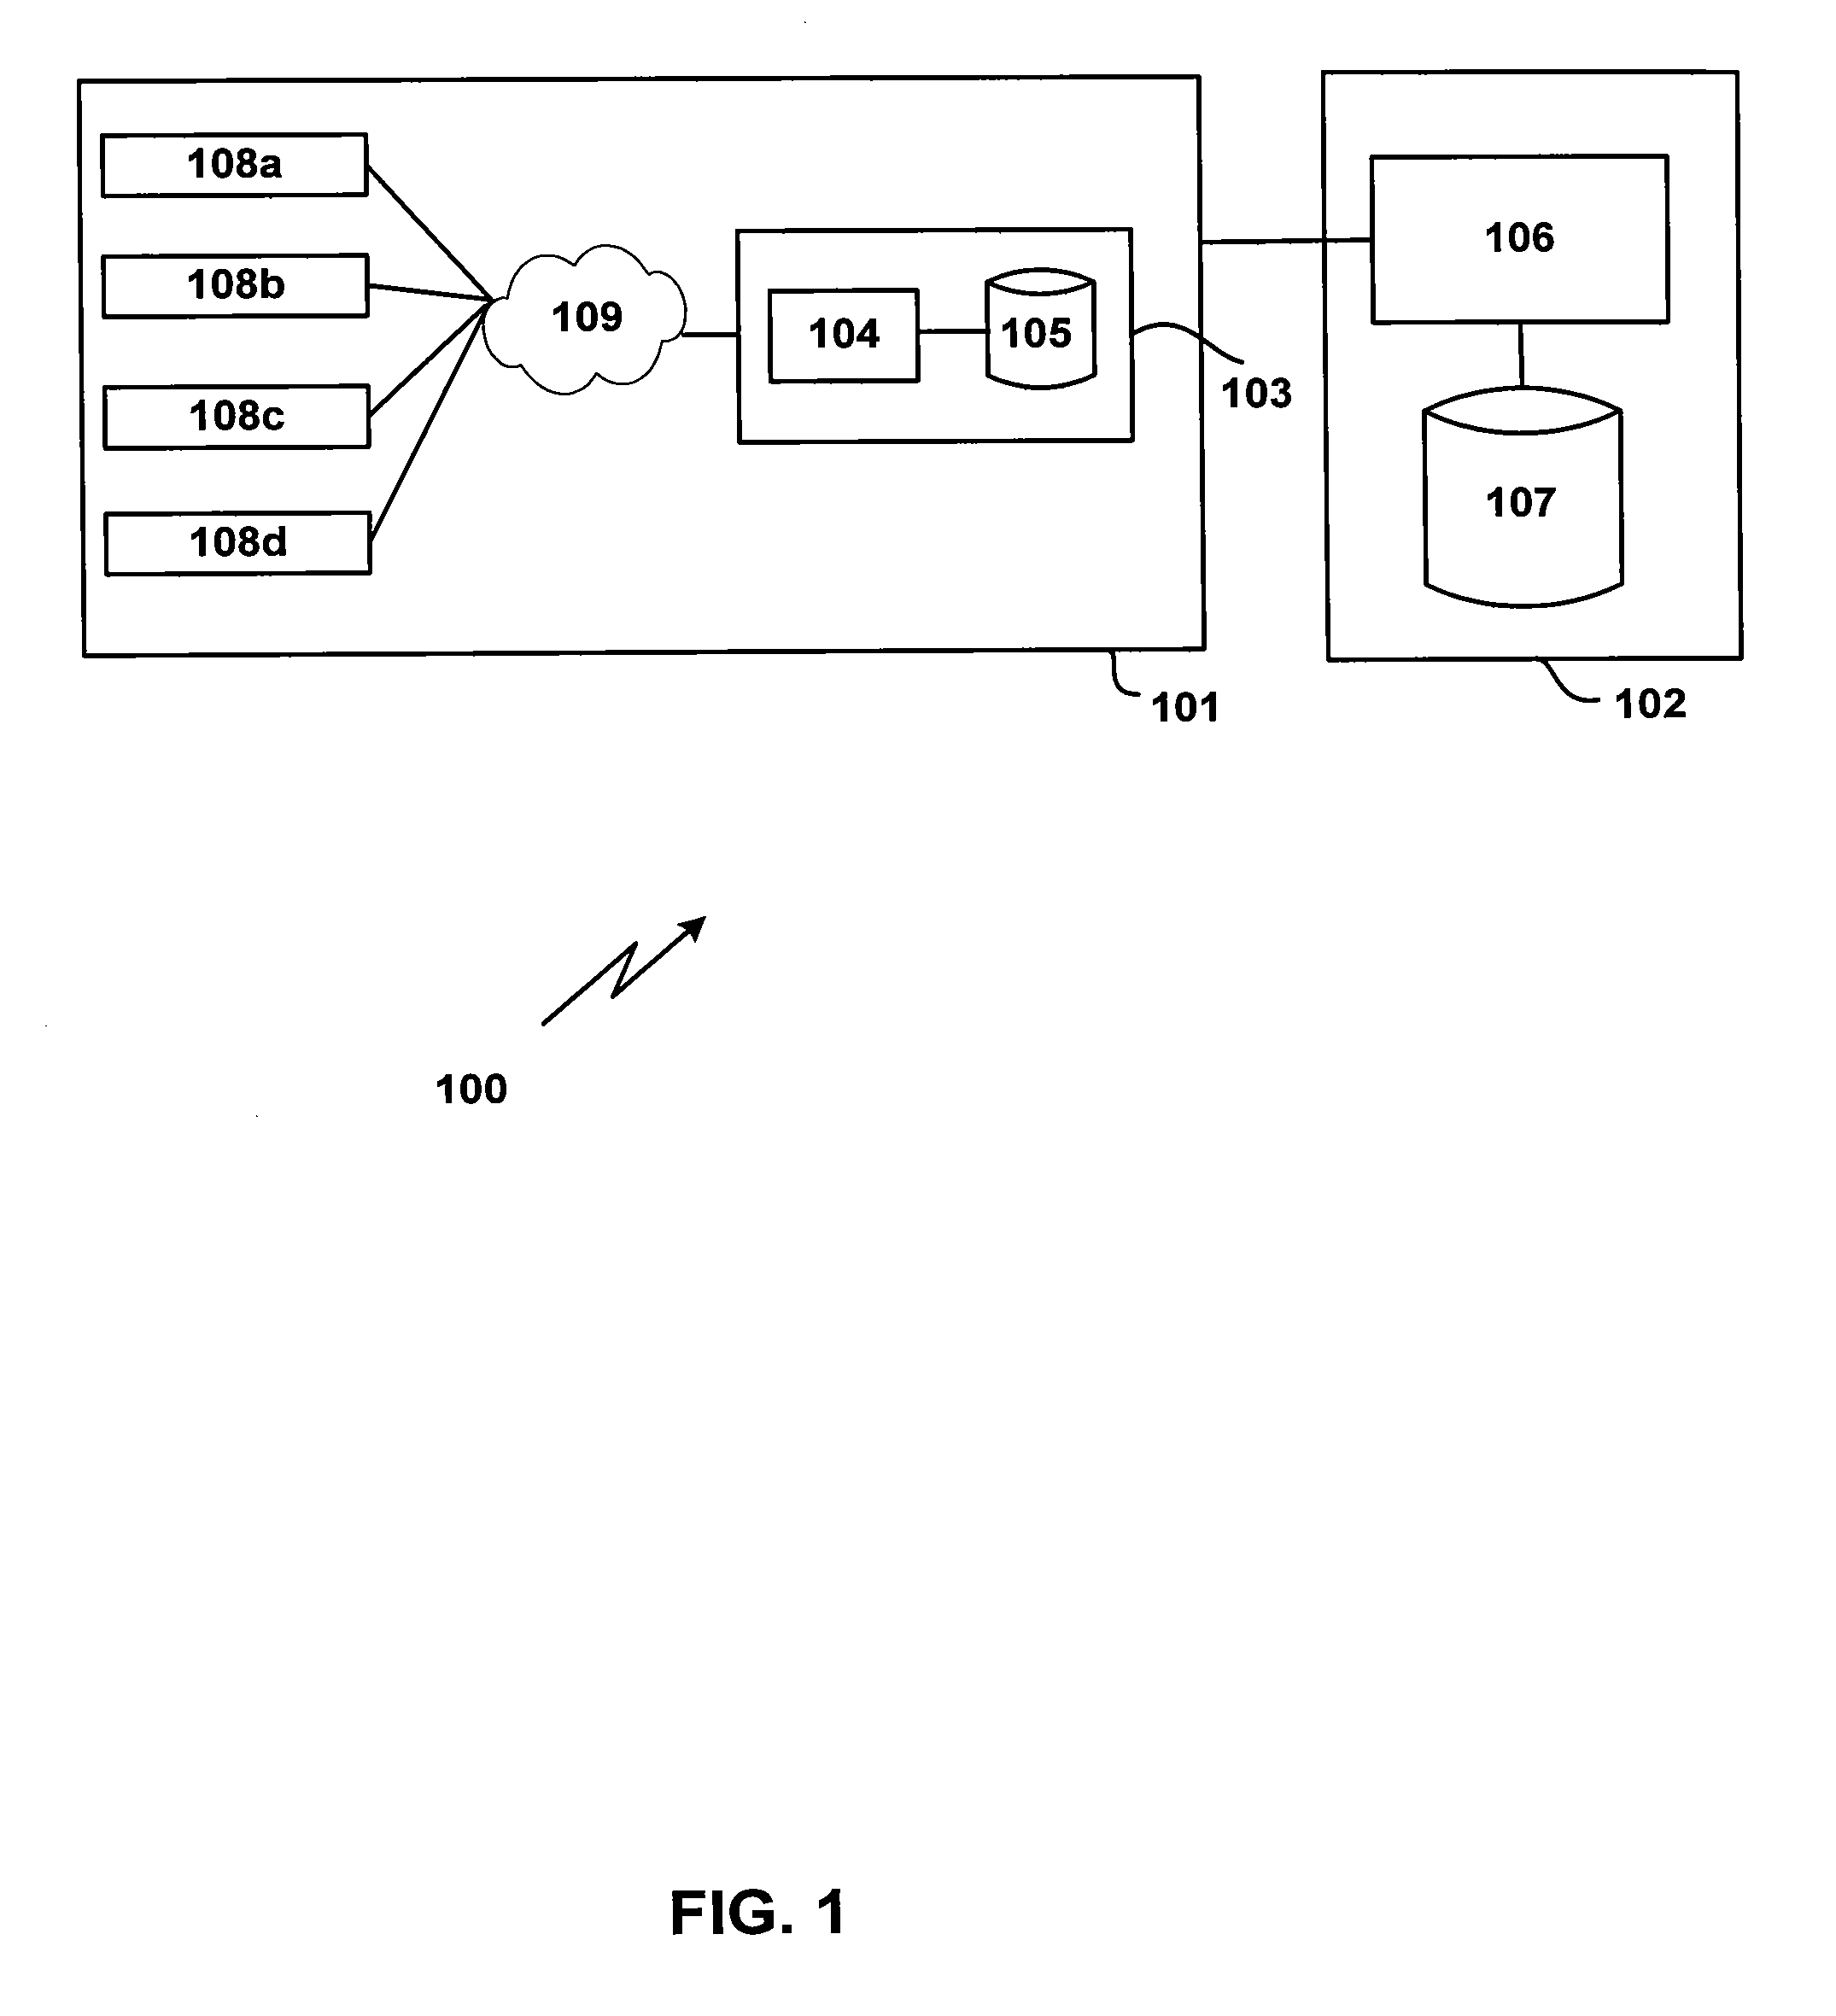 Systems and methods for evaluating financial transaction risk